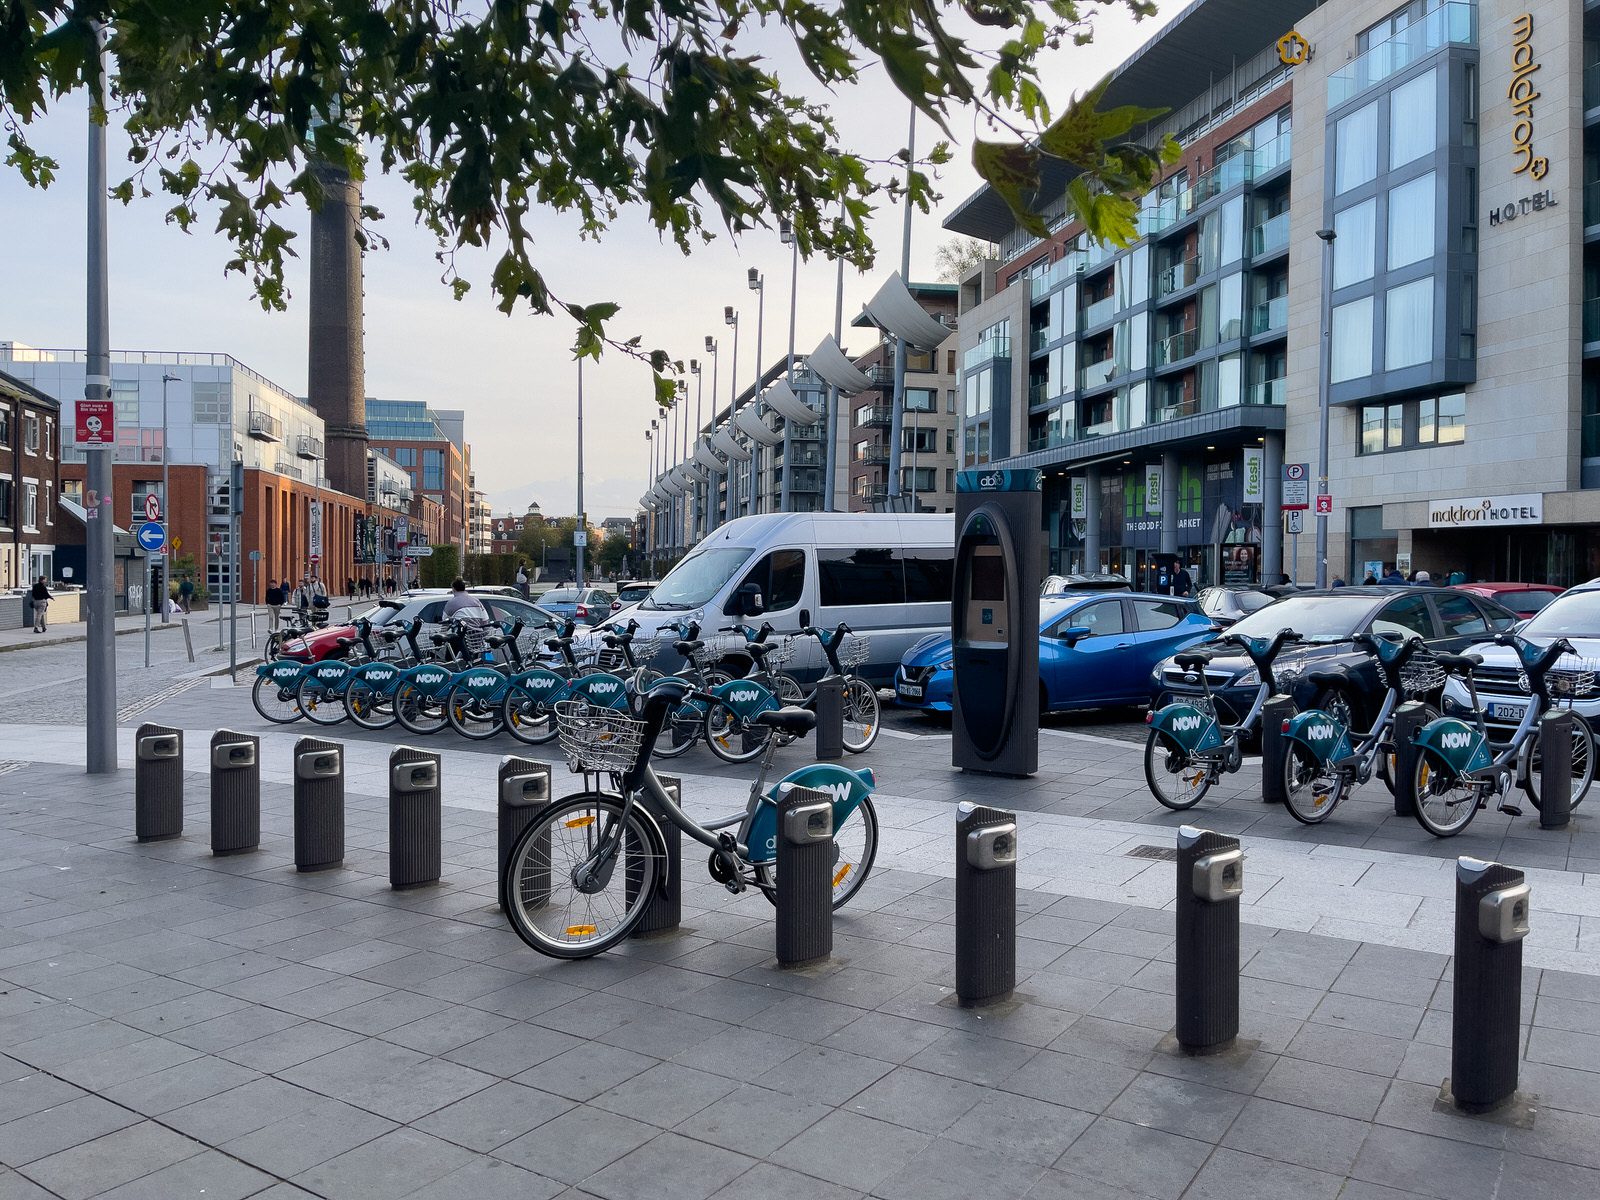 DUBLINBIKES DOCKING STATION 42 [SMITHFIELD PLAZA OR SQUARE - CHOOSE WHICH YOU PREFER] 007